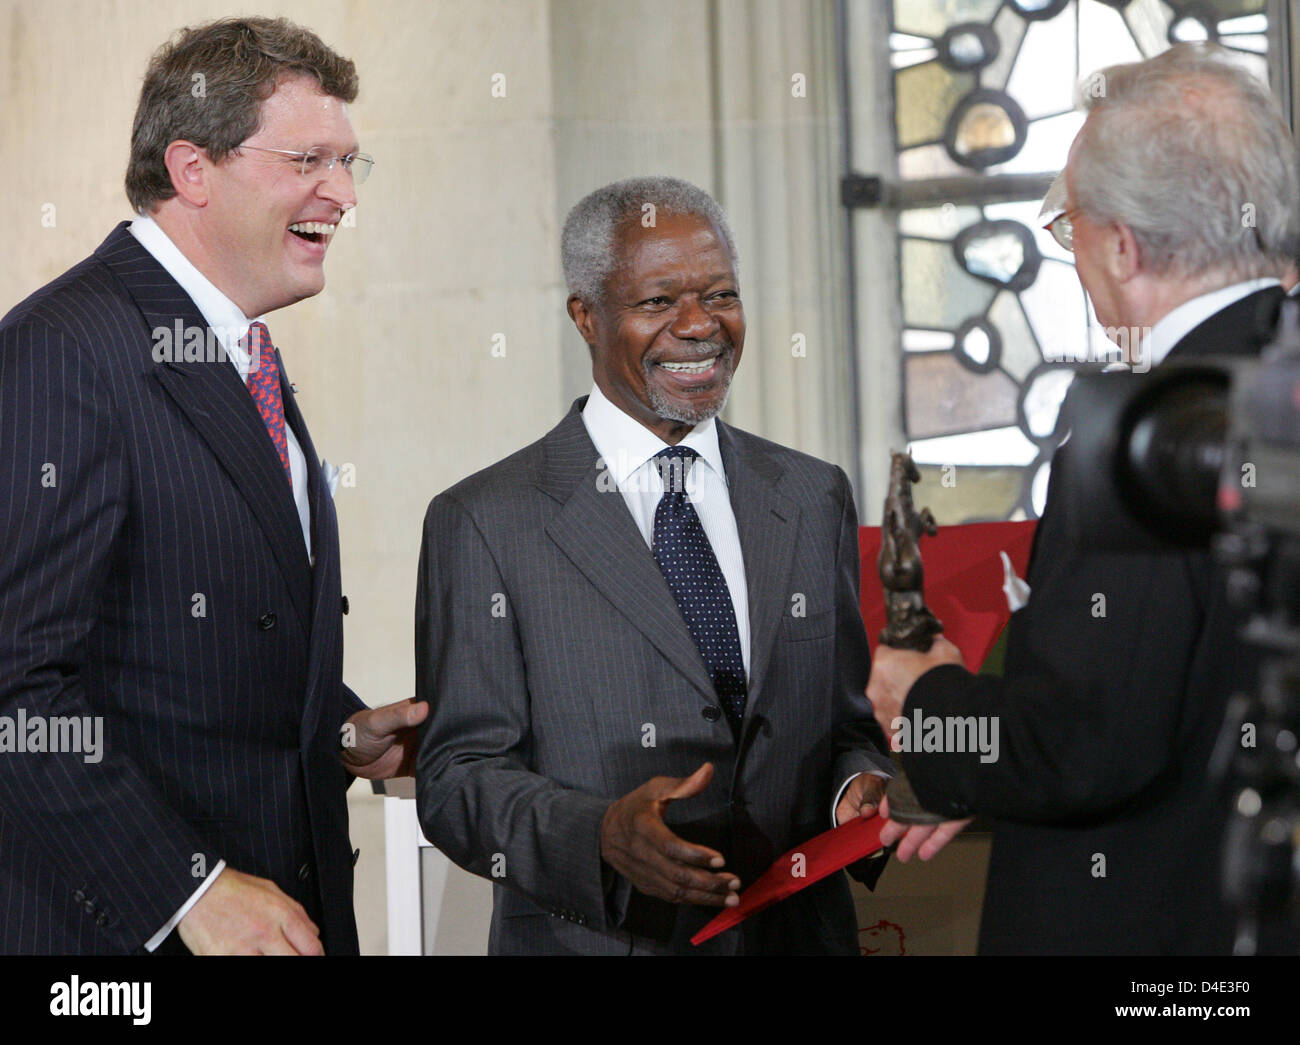 Former UN General Secretary Kofi Annan (C) receives the 2008 Westphalian Peace Prize by Reinhard Zinkann (L), Chairman of the Economic Society for Westphalia an Lippe (Wirtschaftliche Gesellschaft für Westfalen und Lippe e. V.) and its managing board member, Horst Annecke (R), at the townhall in Muenster, Germany, 11 October 2008. The award honours the lasting vision of peace of th Stock Photo